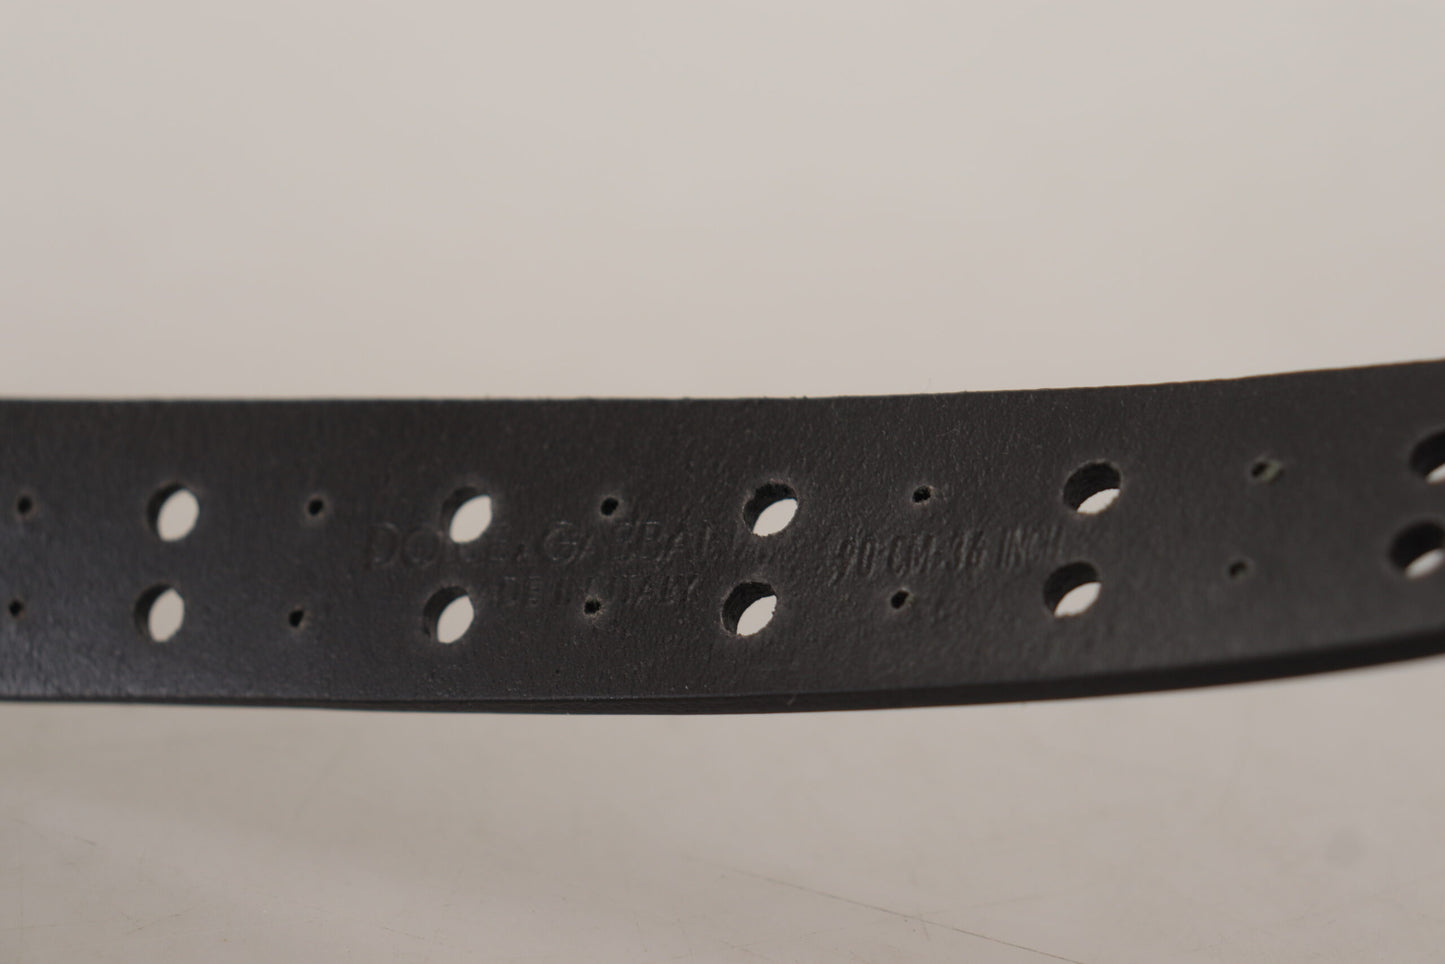 Dolce & Gabbana Black Leather Perforated Crown Belt